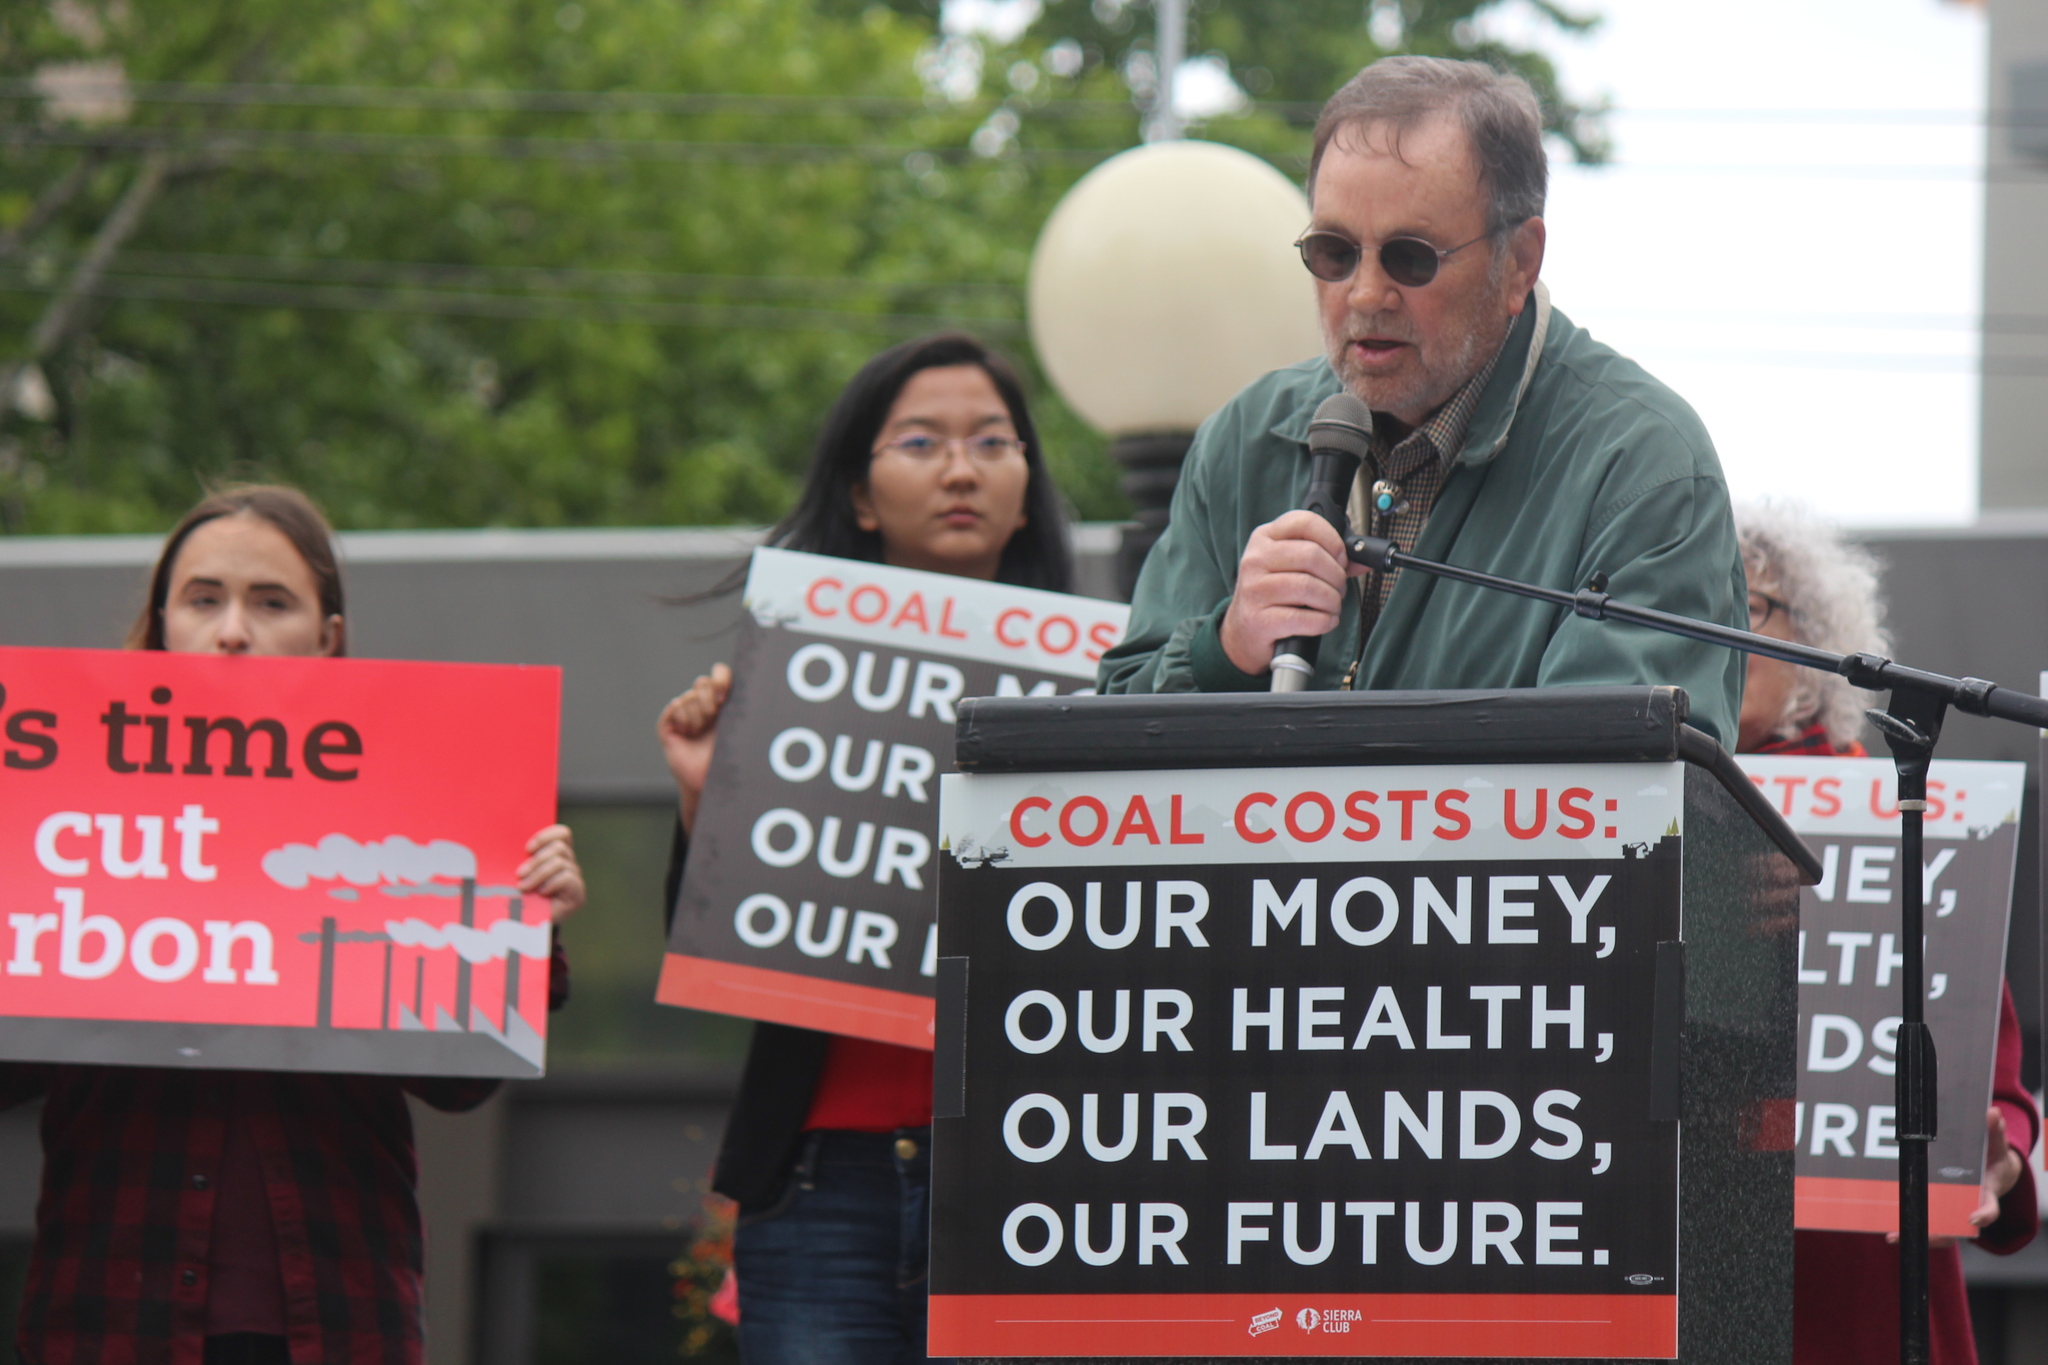 Rally Shows the Feds How Seattle Feels About Coal